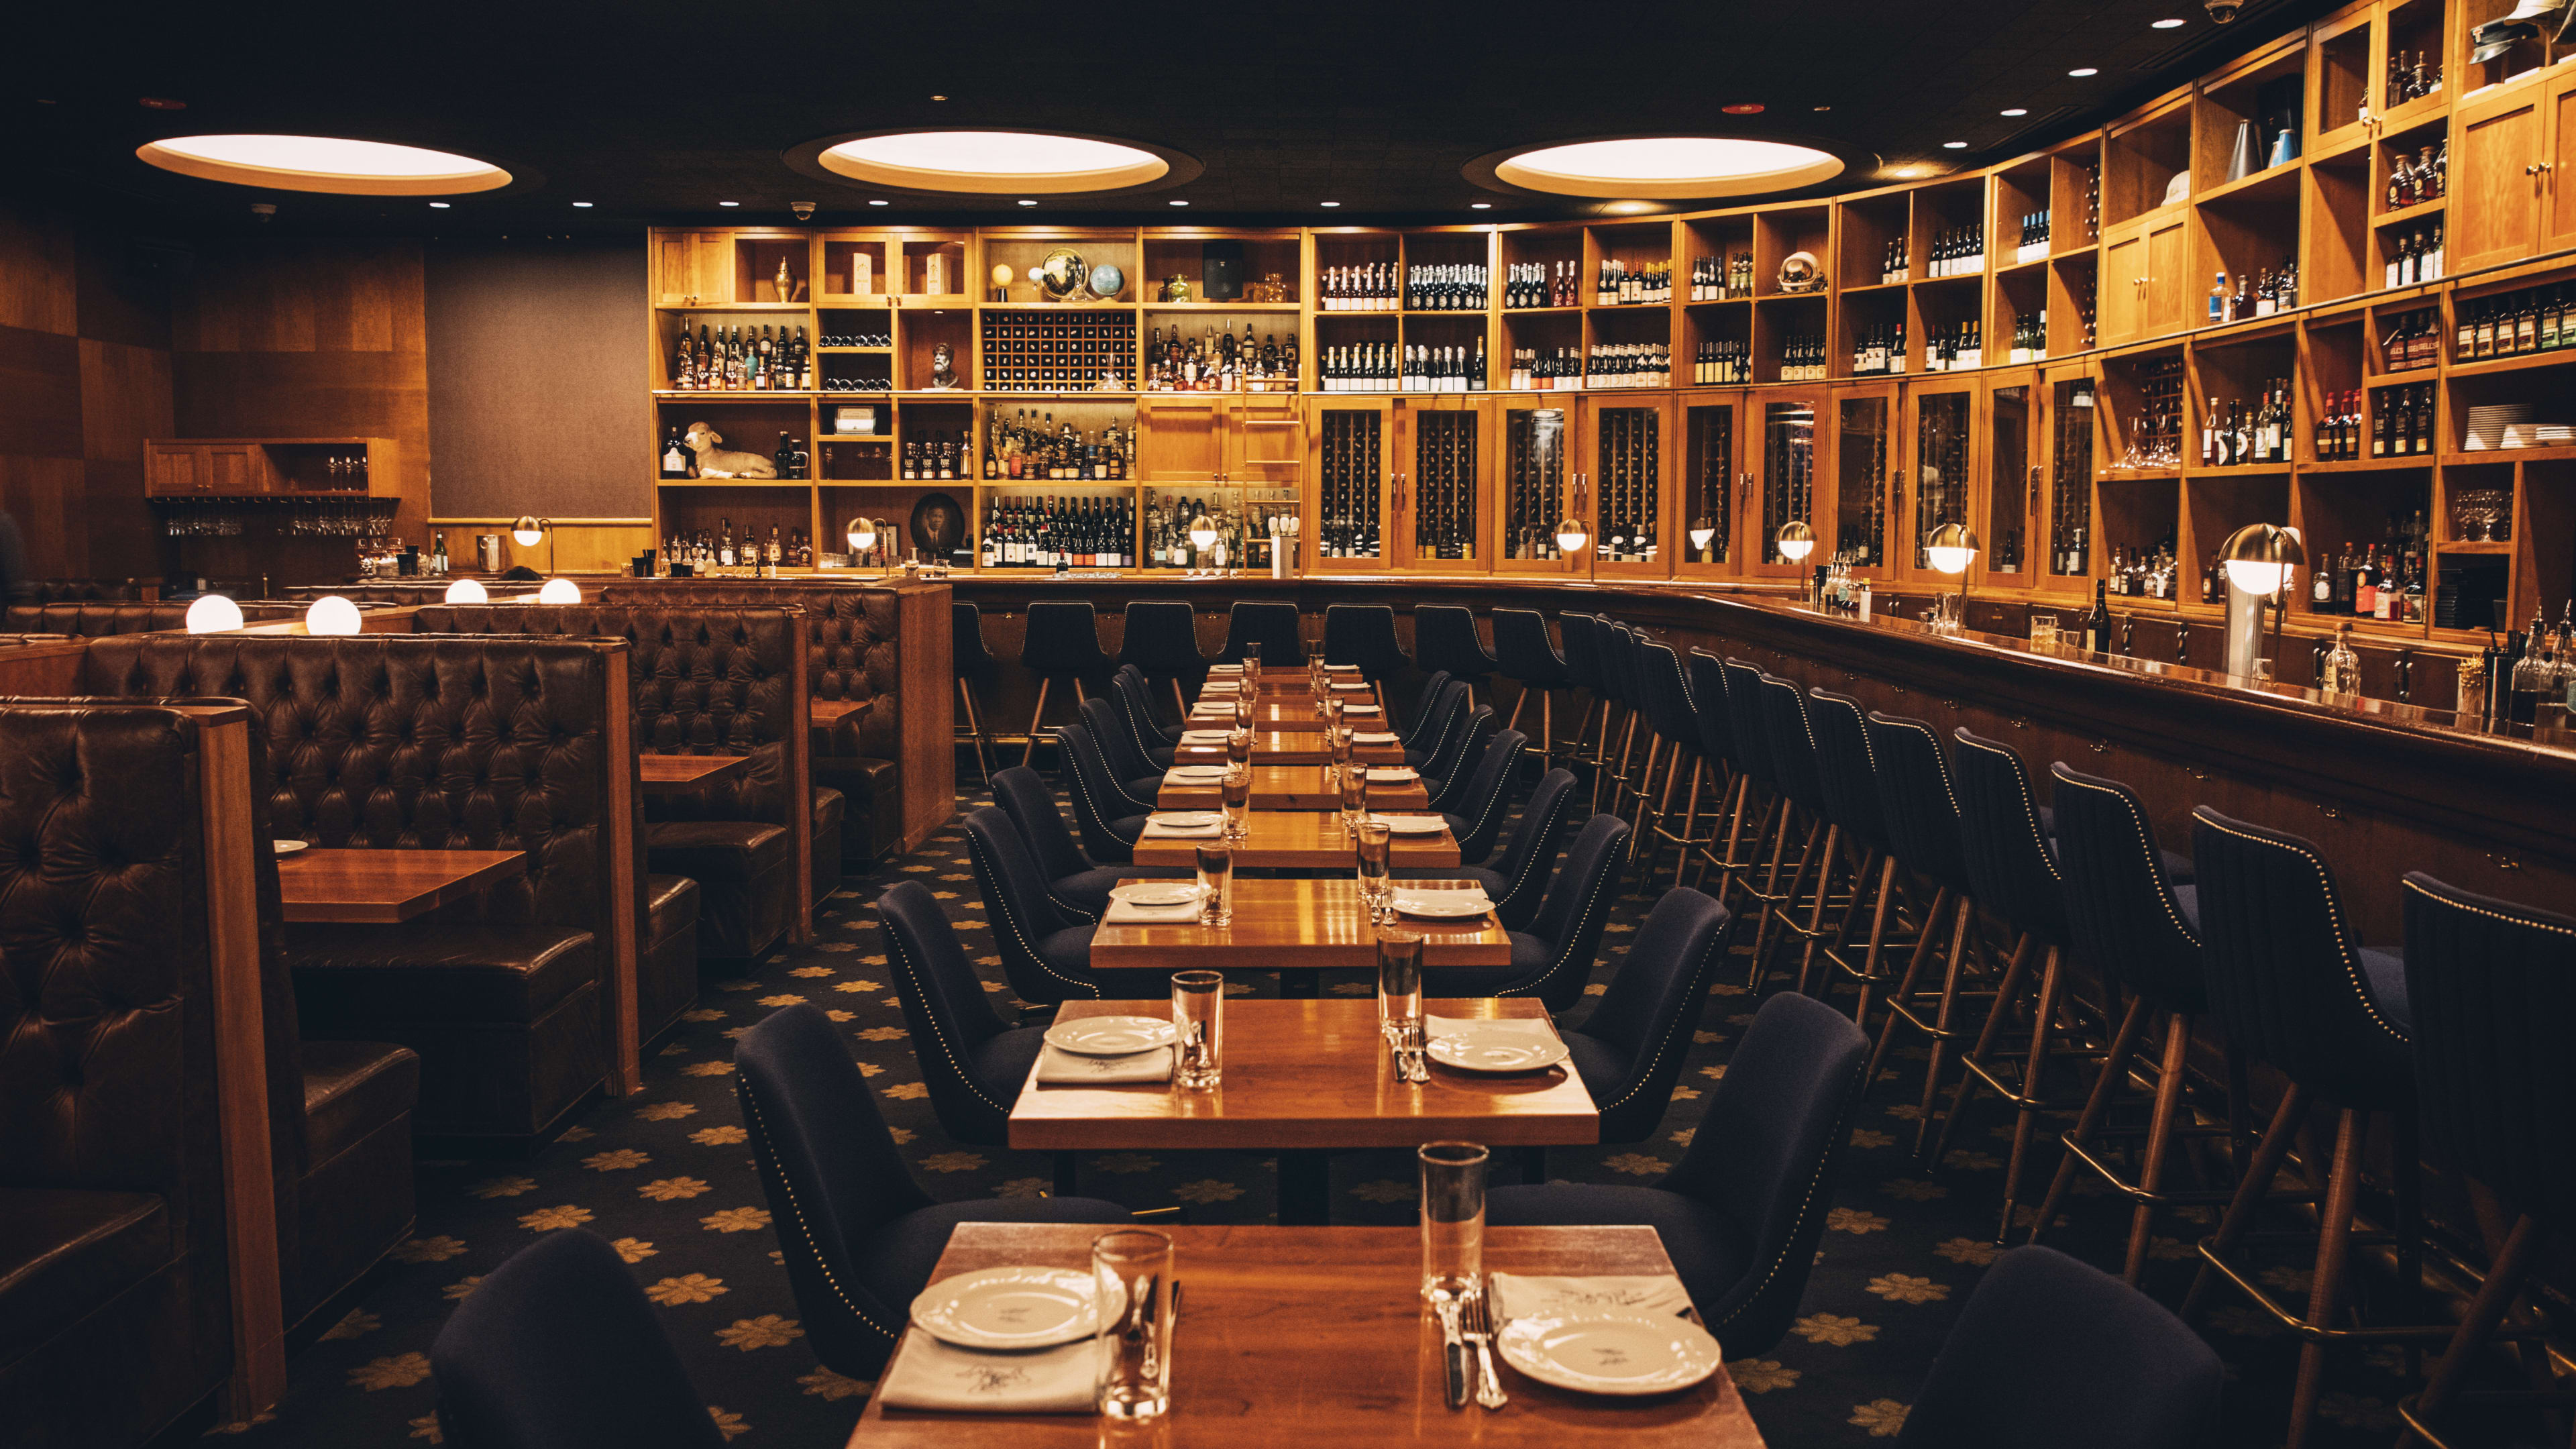 Long, wraparound wooden bar lined with wood shelves, and big leather booths